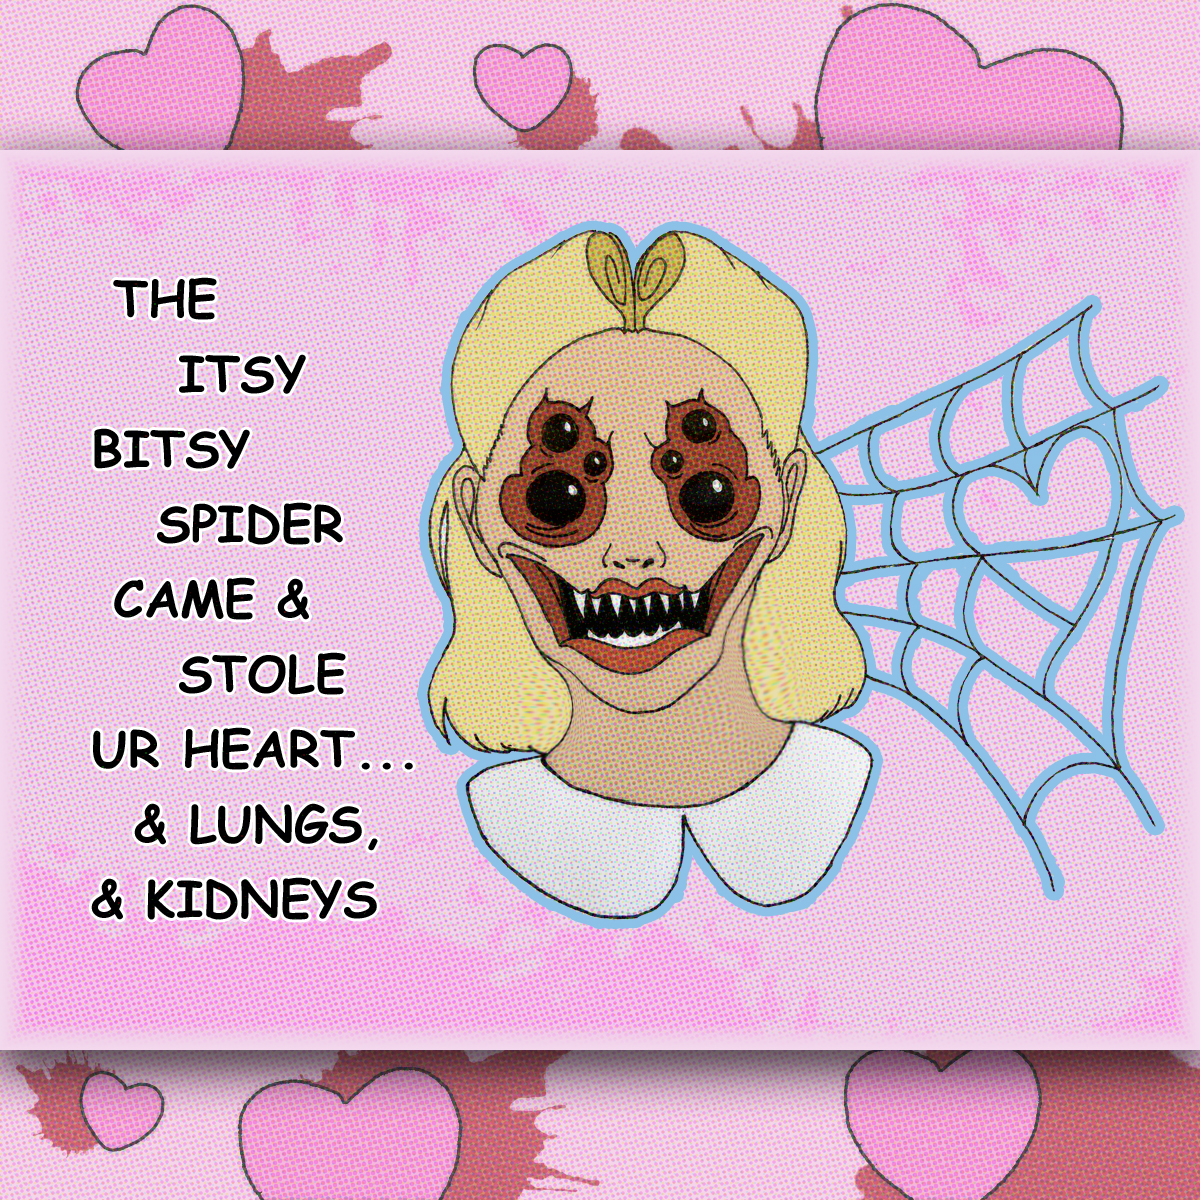 cartoon - The Itsy Bitsy Spider Came & Stole Ur Heart & Lungs, & Kidneys